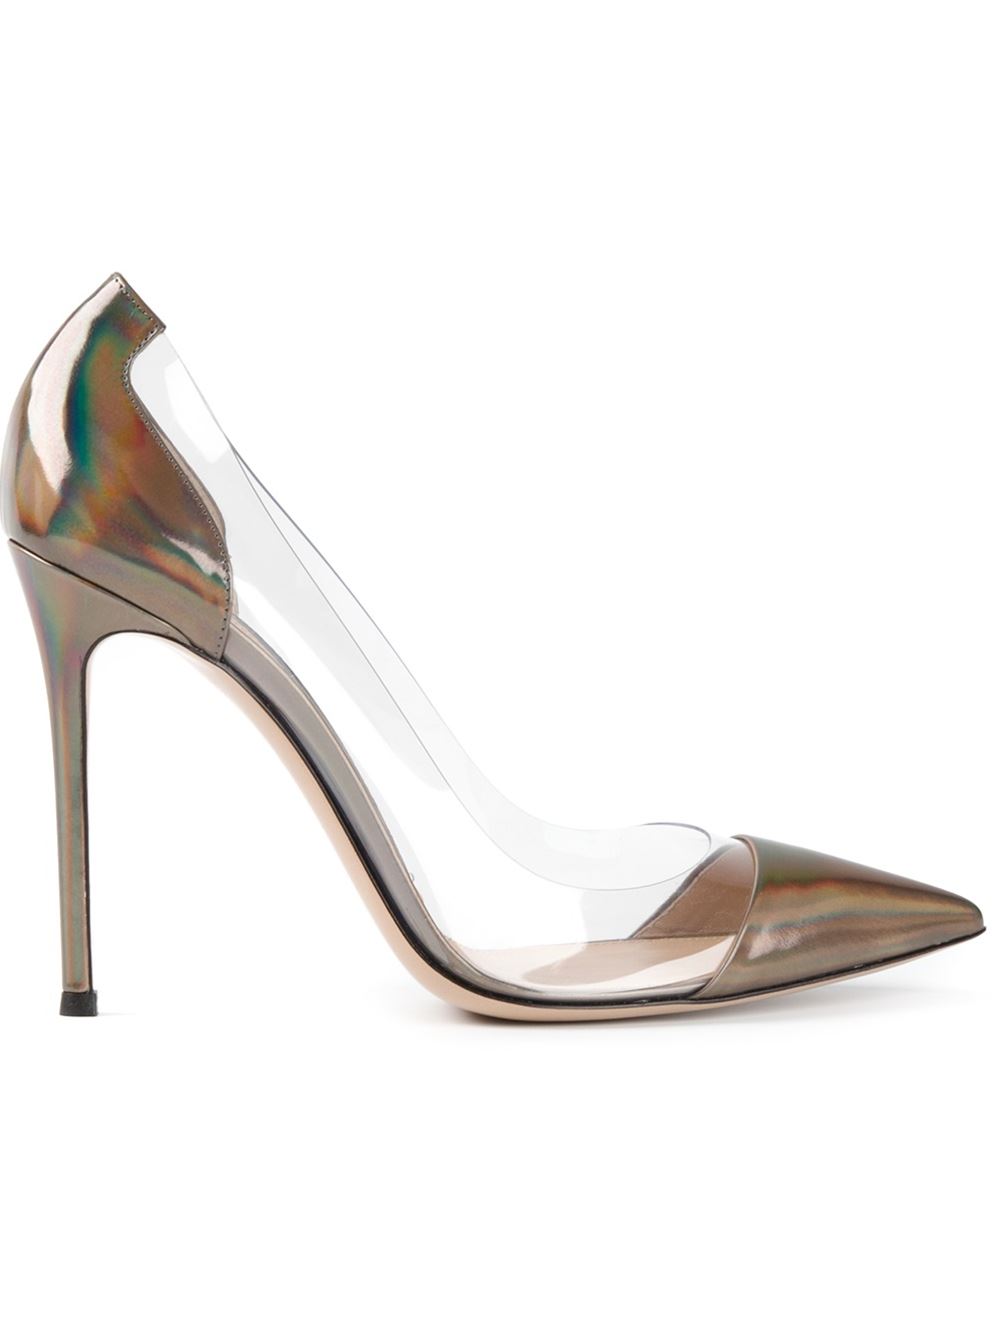 Bomb Product of the Day: Gianvito Rossi Leather and Perspex Plexi Pumps